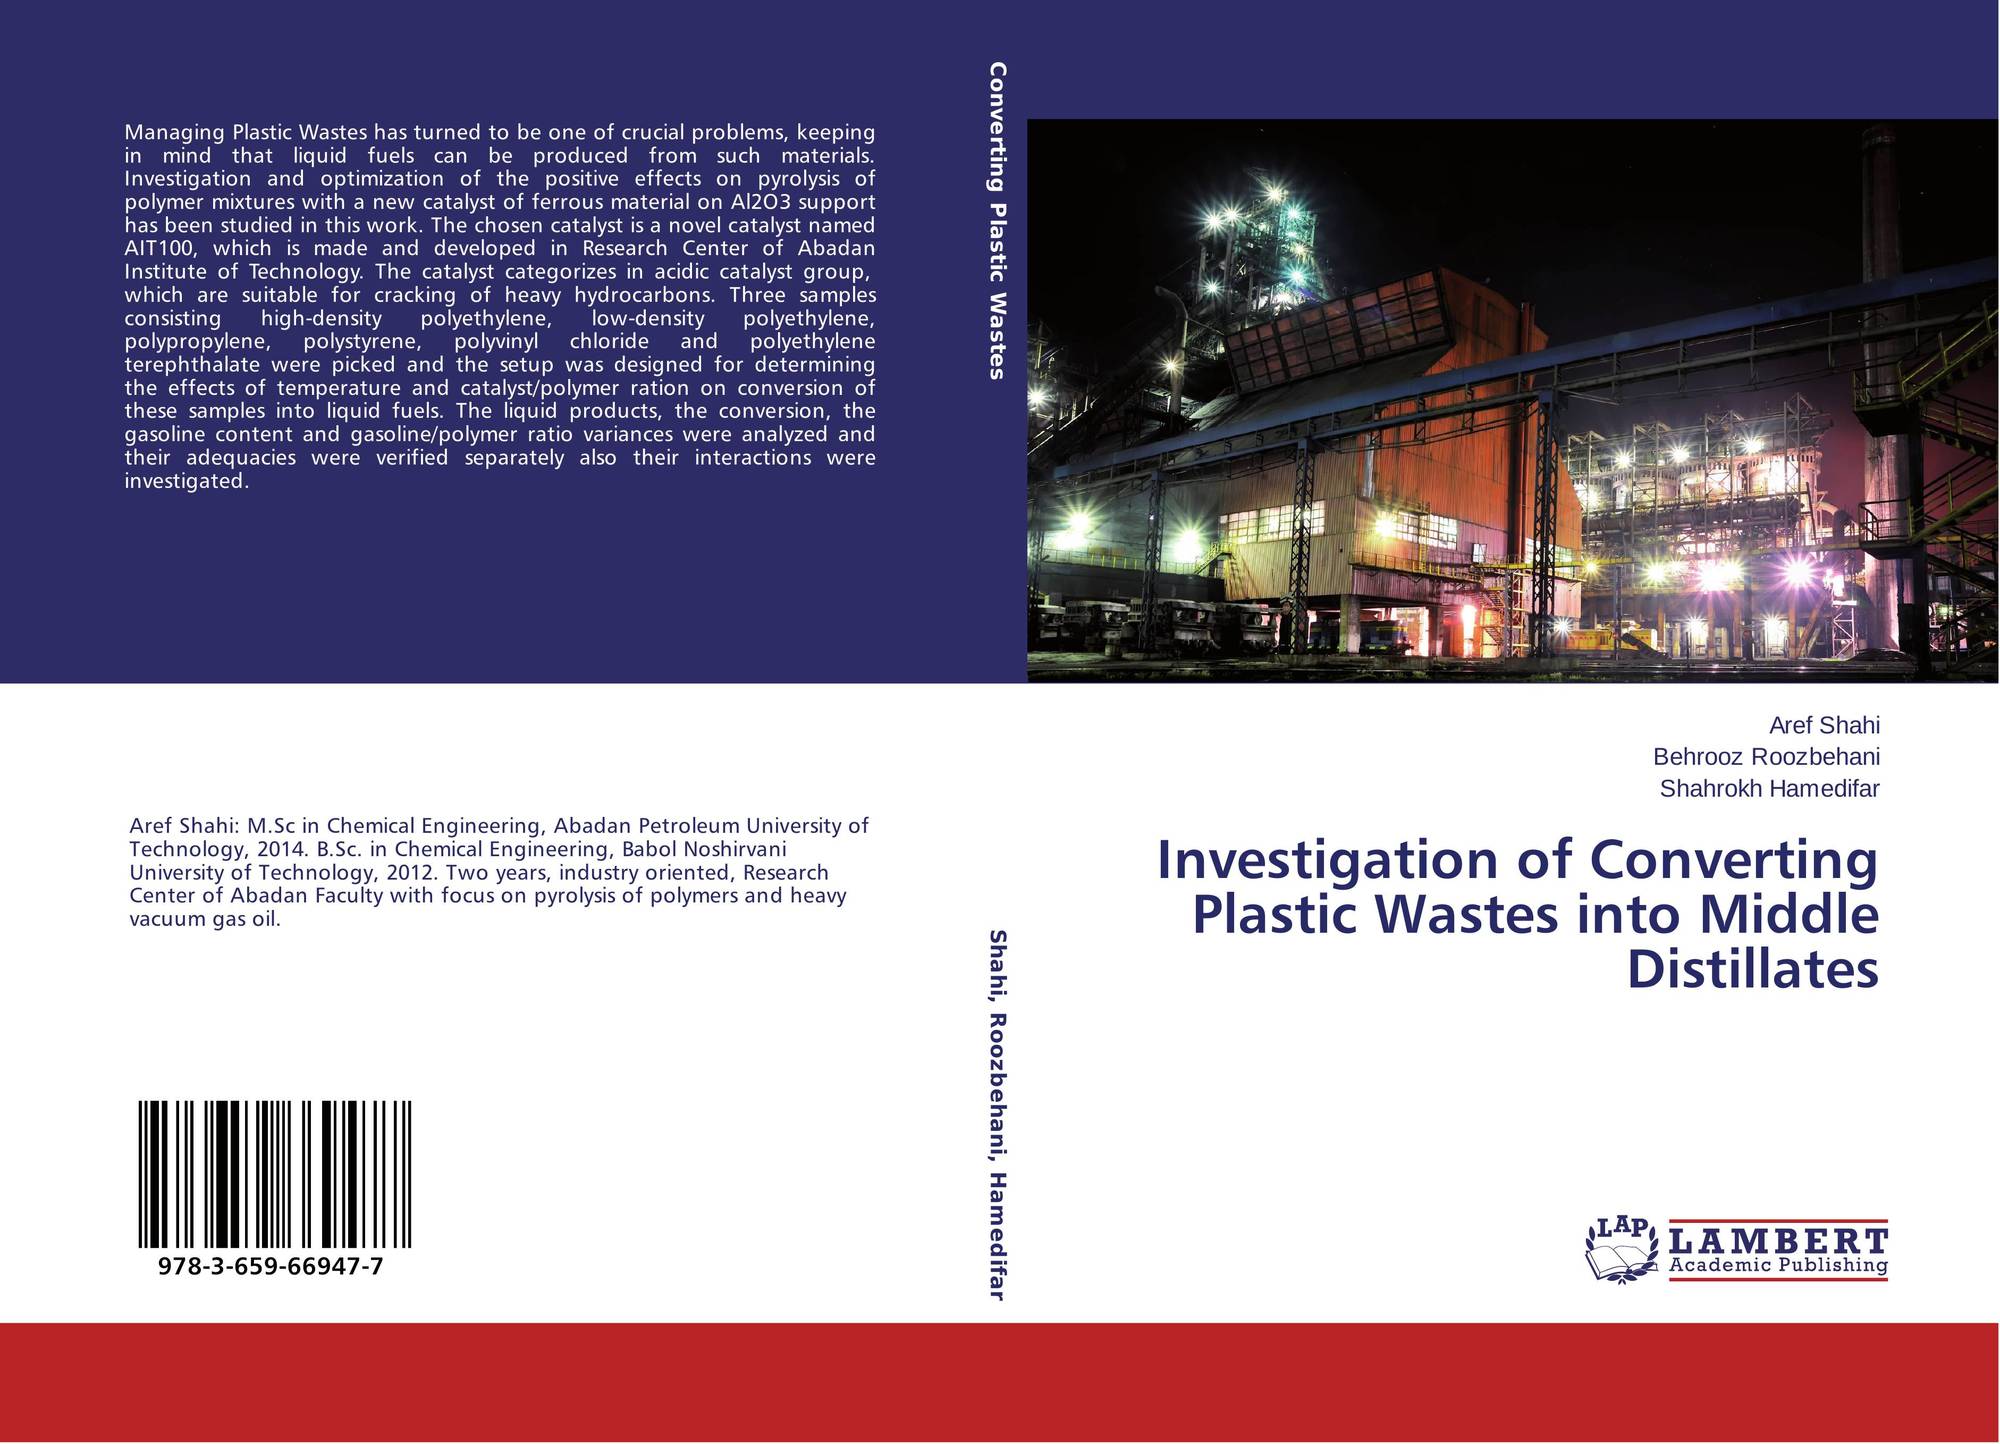 Investigation Of Converting Plastic Wastes Into Middle Distillates